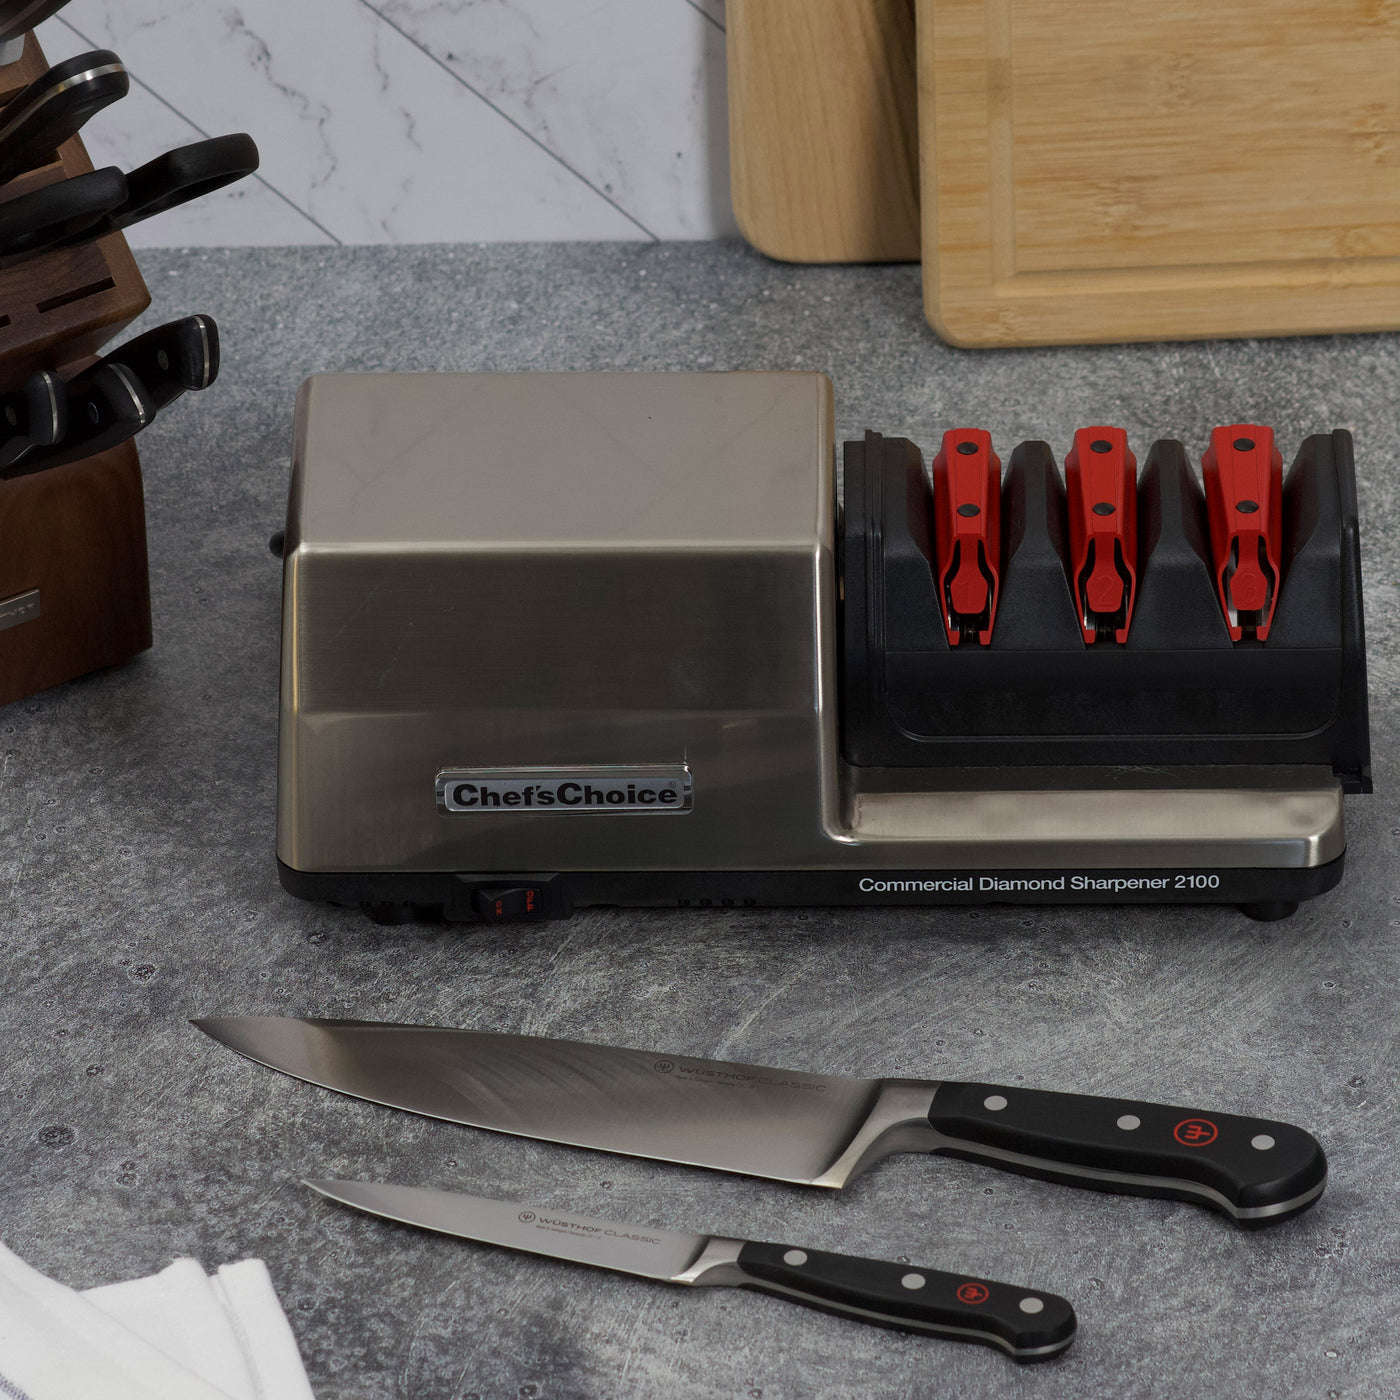 Chef'sChoice Replacement Sharpening Module